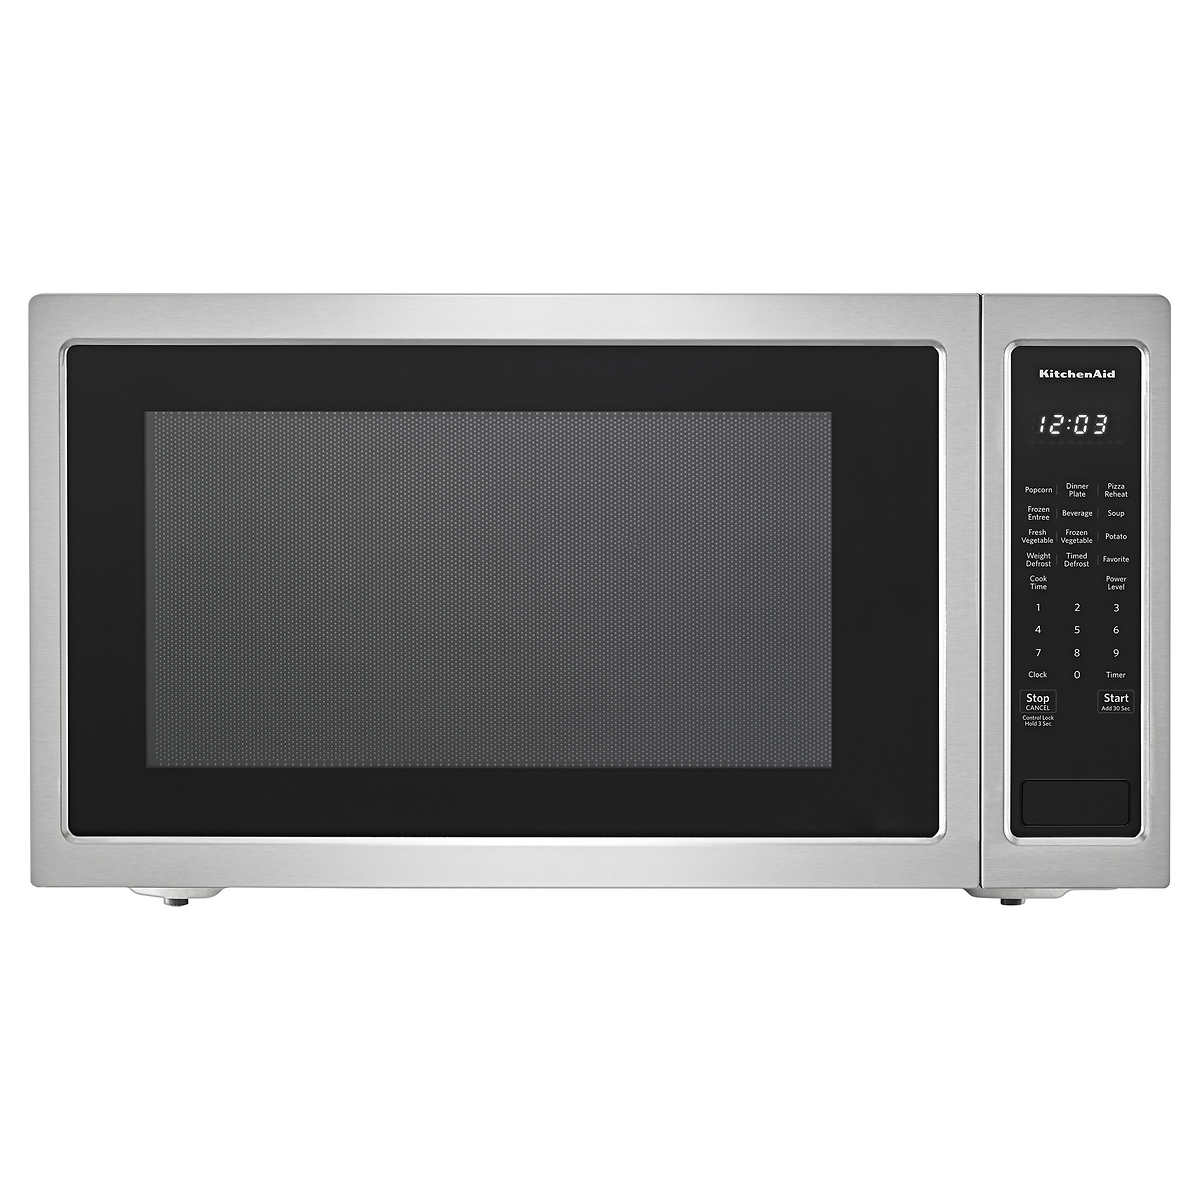 Kitchenaid 22cuft Countertop Microwave Oven With 9 Quick Touch Cycles Including Six Sensor Cycles